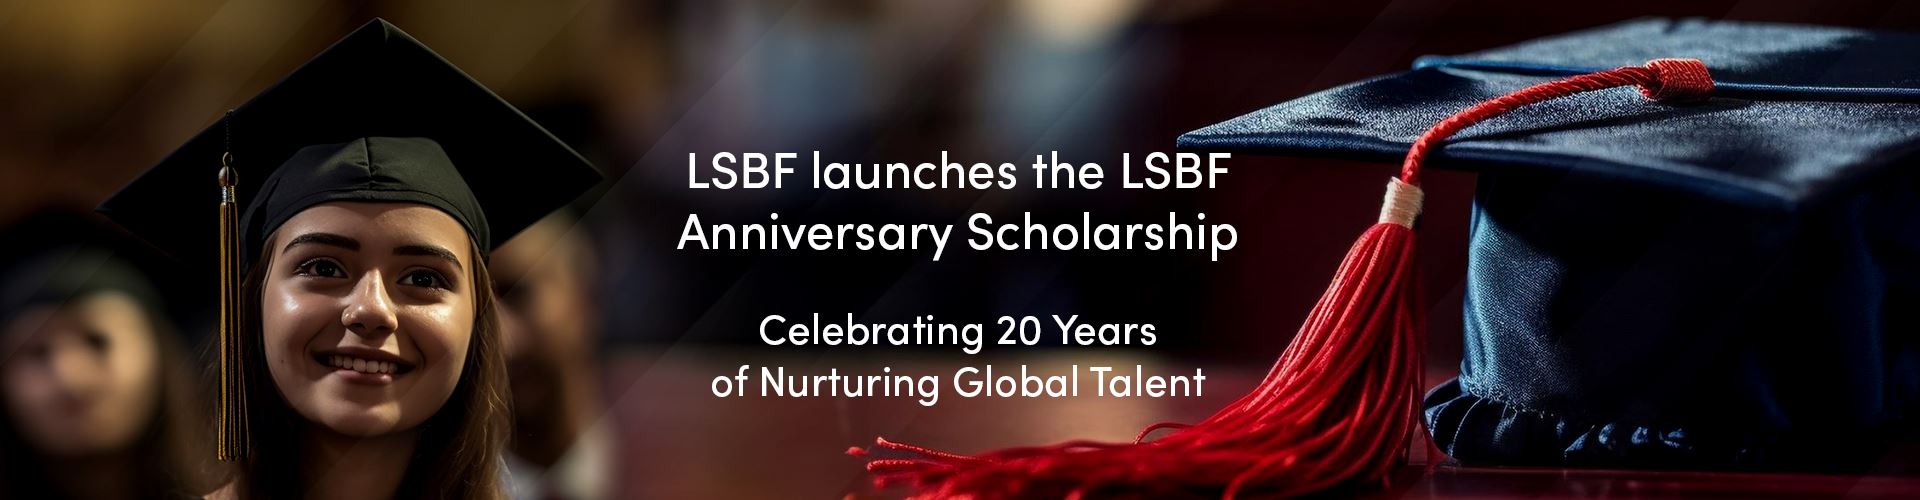 LSBF launches the LSBF Anniversary Scholarship, Celebrating 20 Years of Nurturing Global Talent